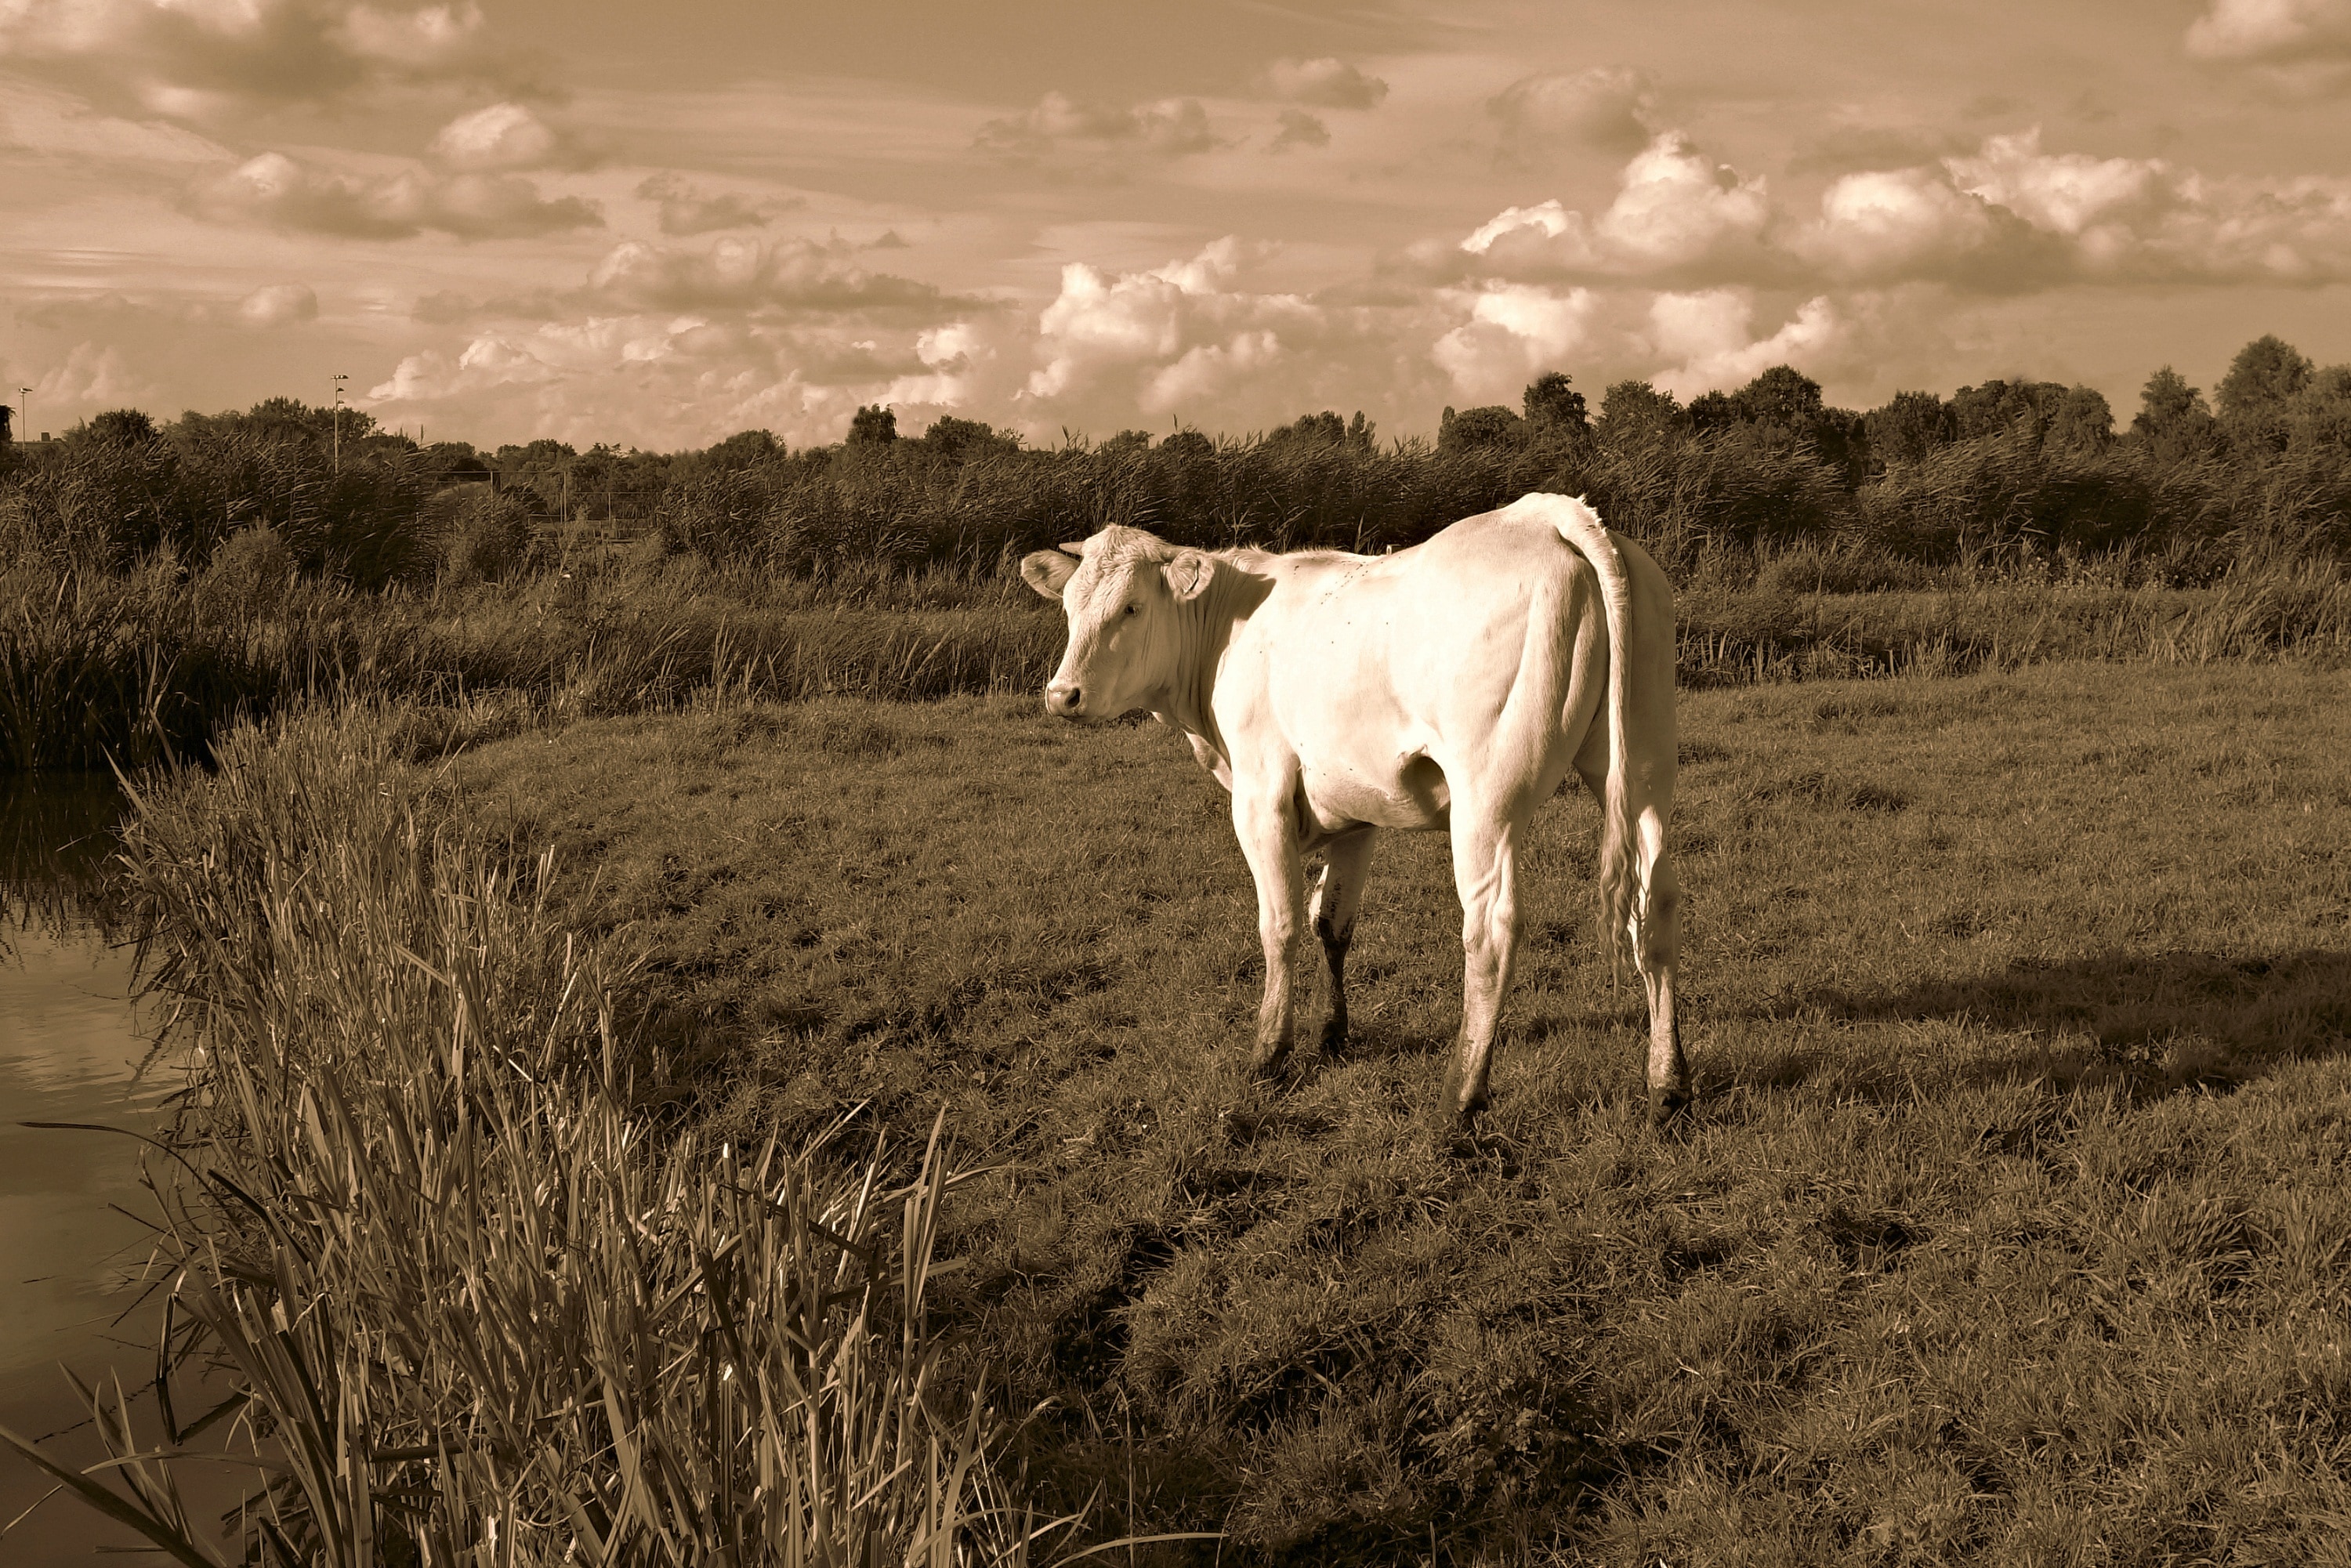 grayscale photo of cow on grass field during daytime